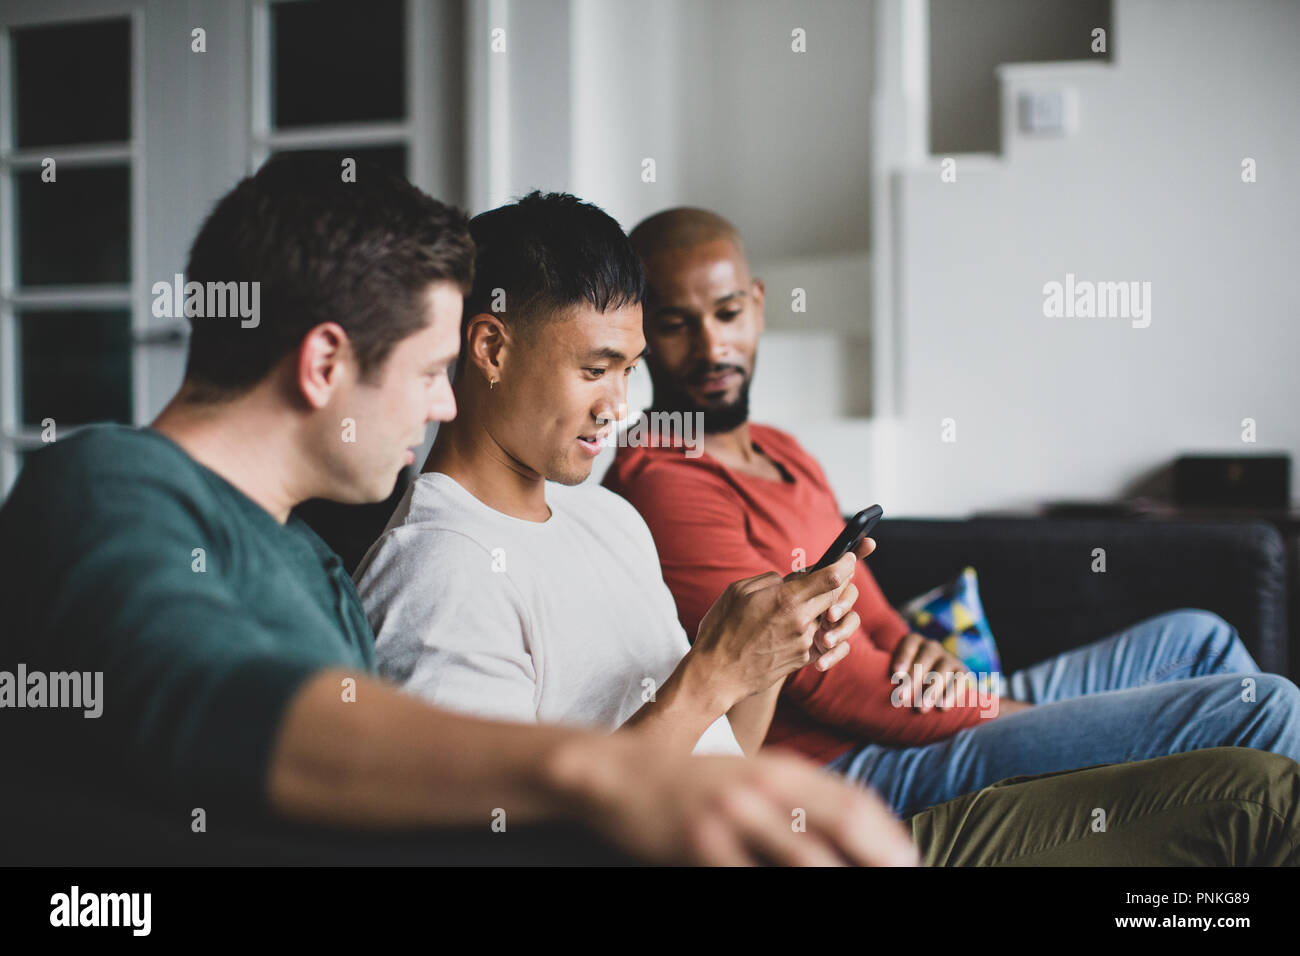 Male friends looking at smartphone together Stock Photo